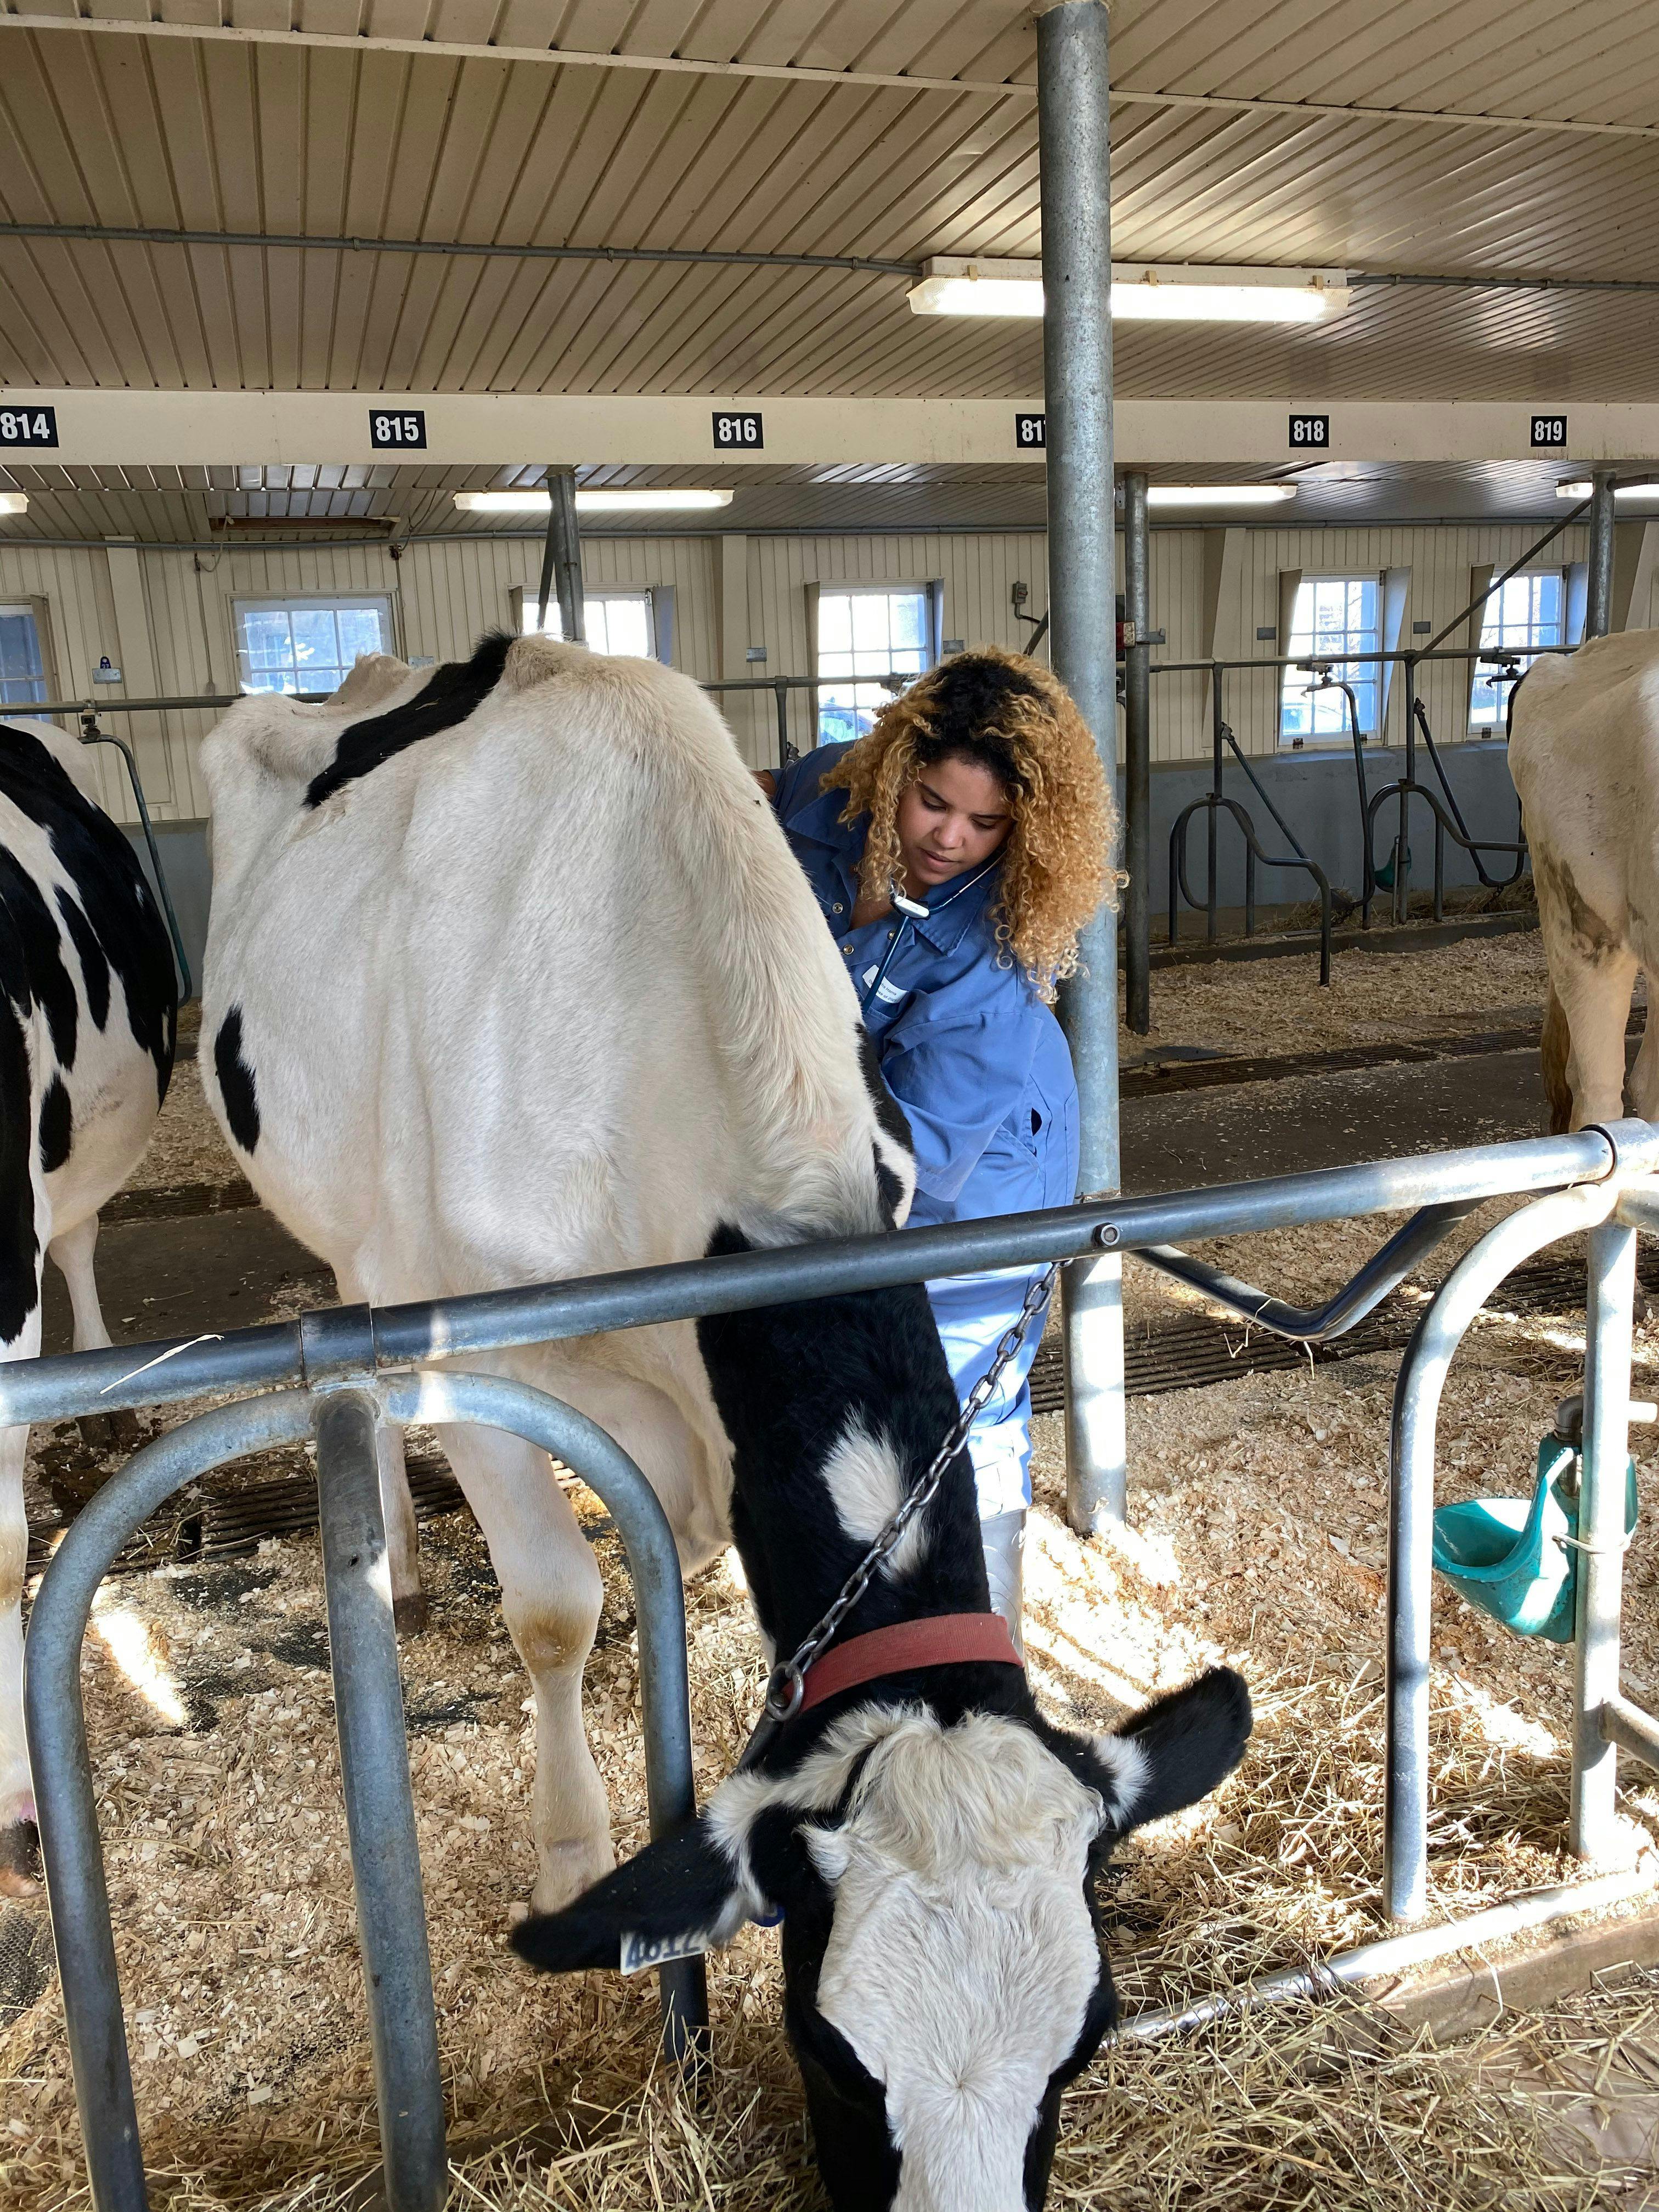 Photo: Keisha/Adobe Stock

A veterinary student works with a dairy cow.